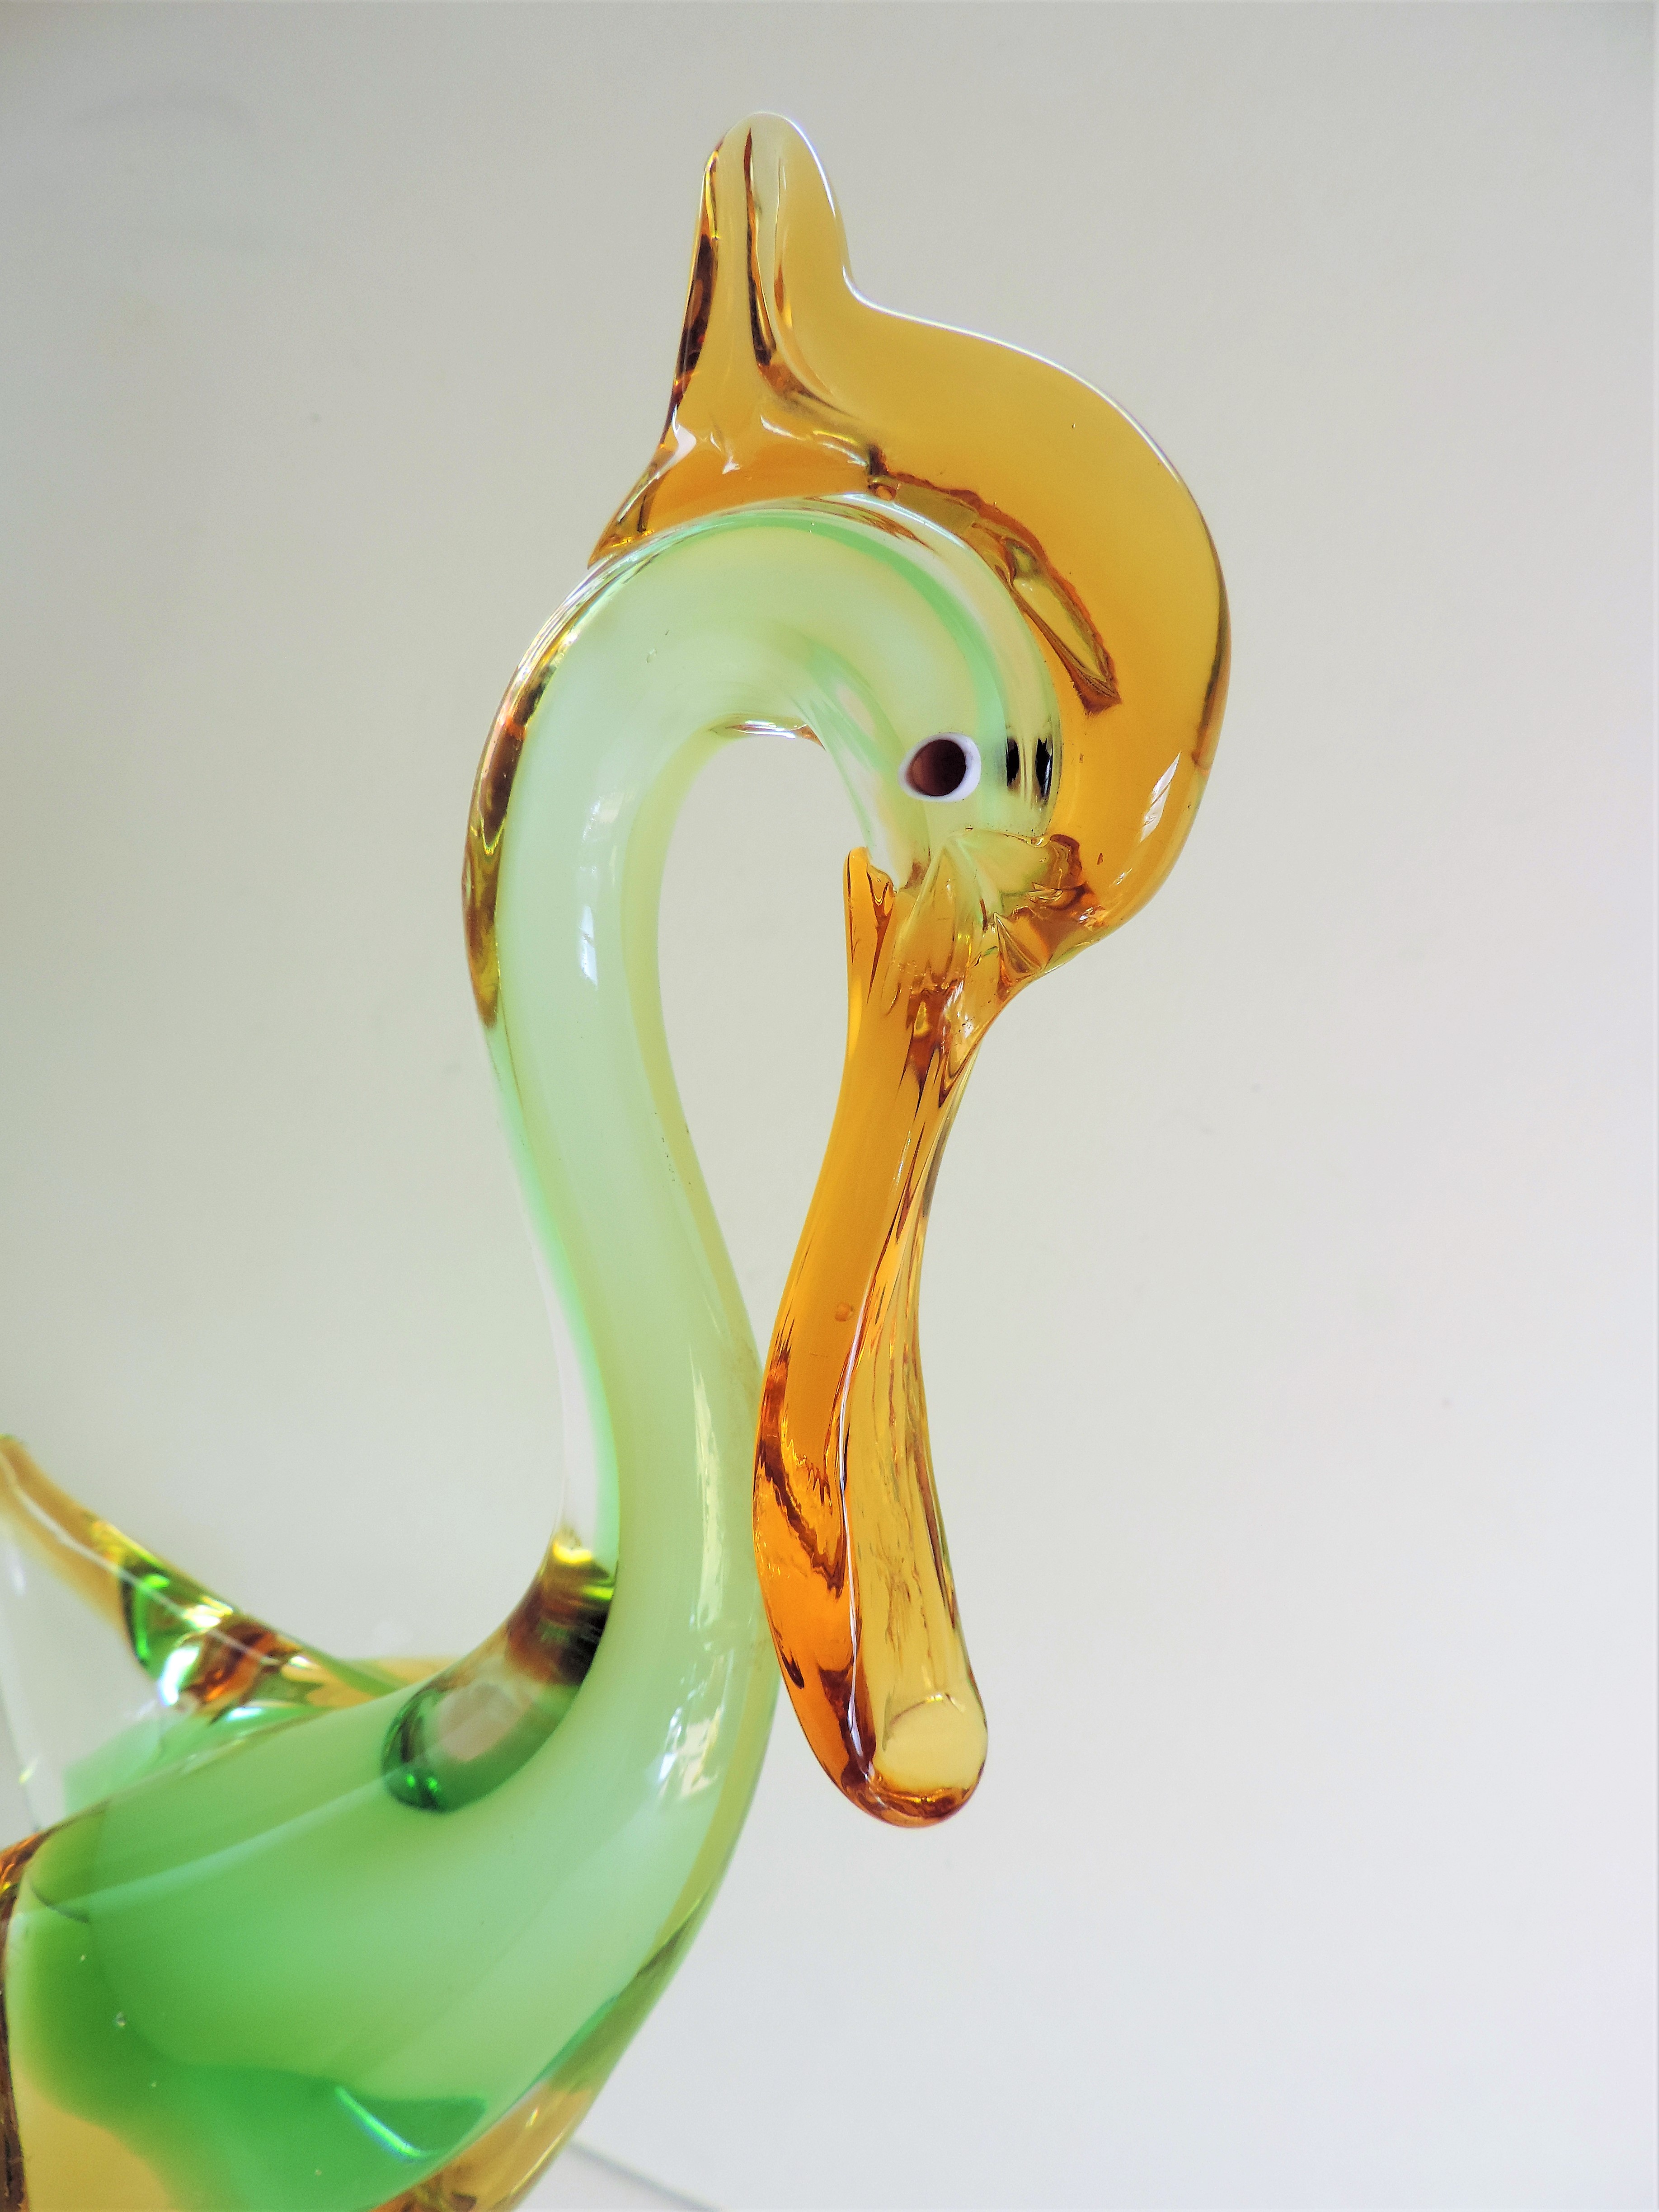 Large Vintage Murano Glass Bird Sculture 34cm Tall - Image 5 of 5